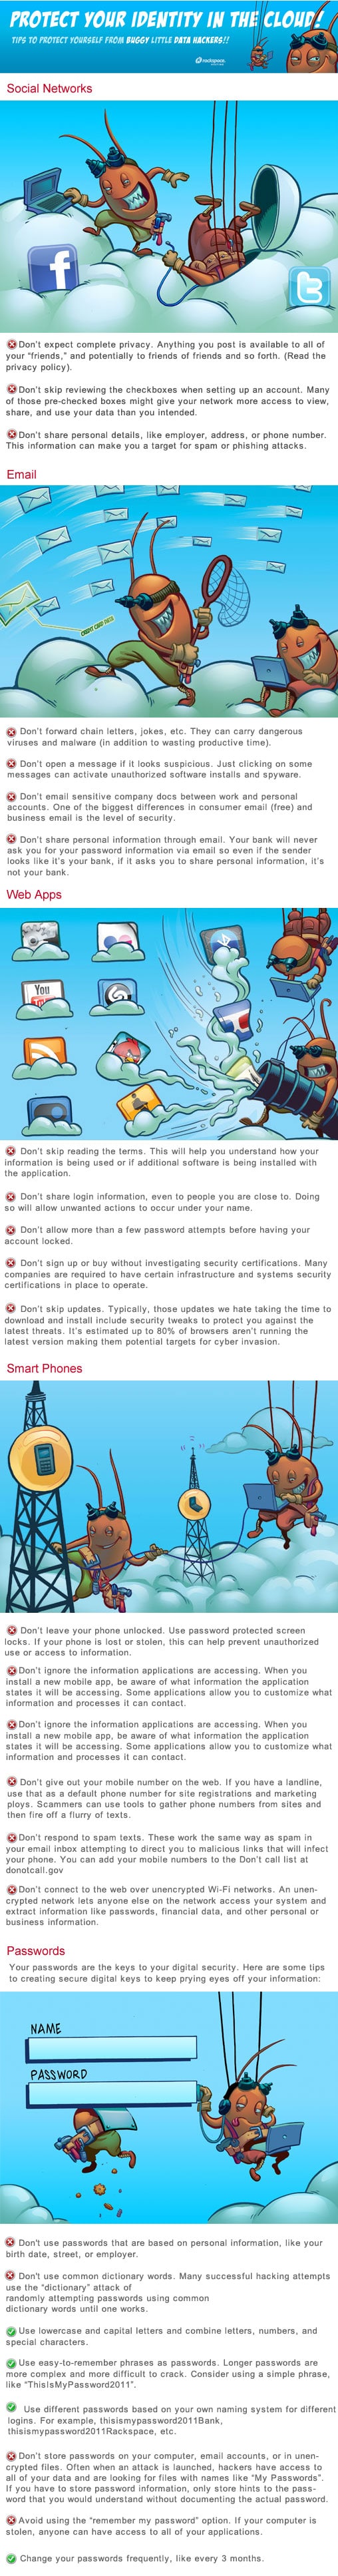 cloud-security-measure-tips-infographic